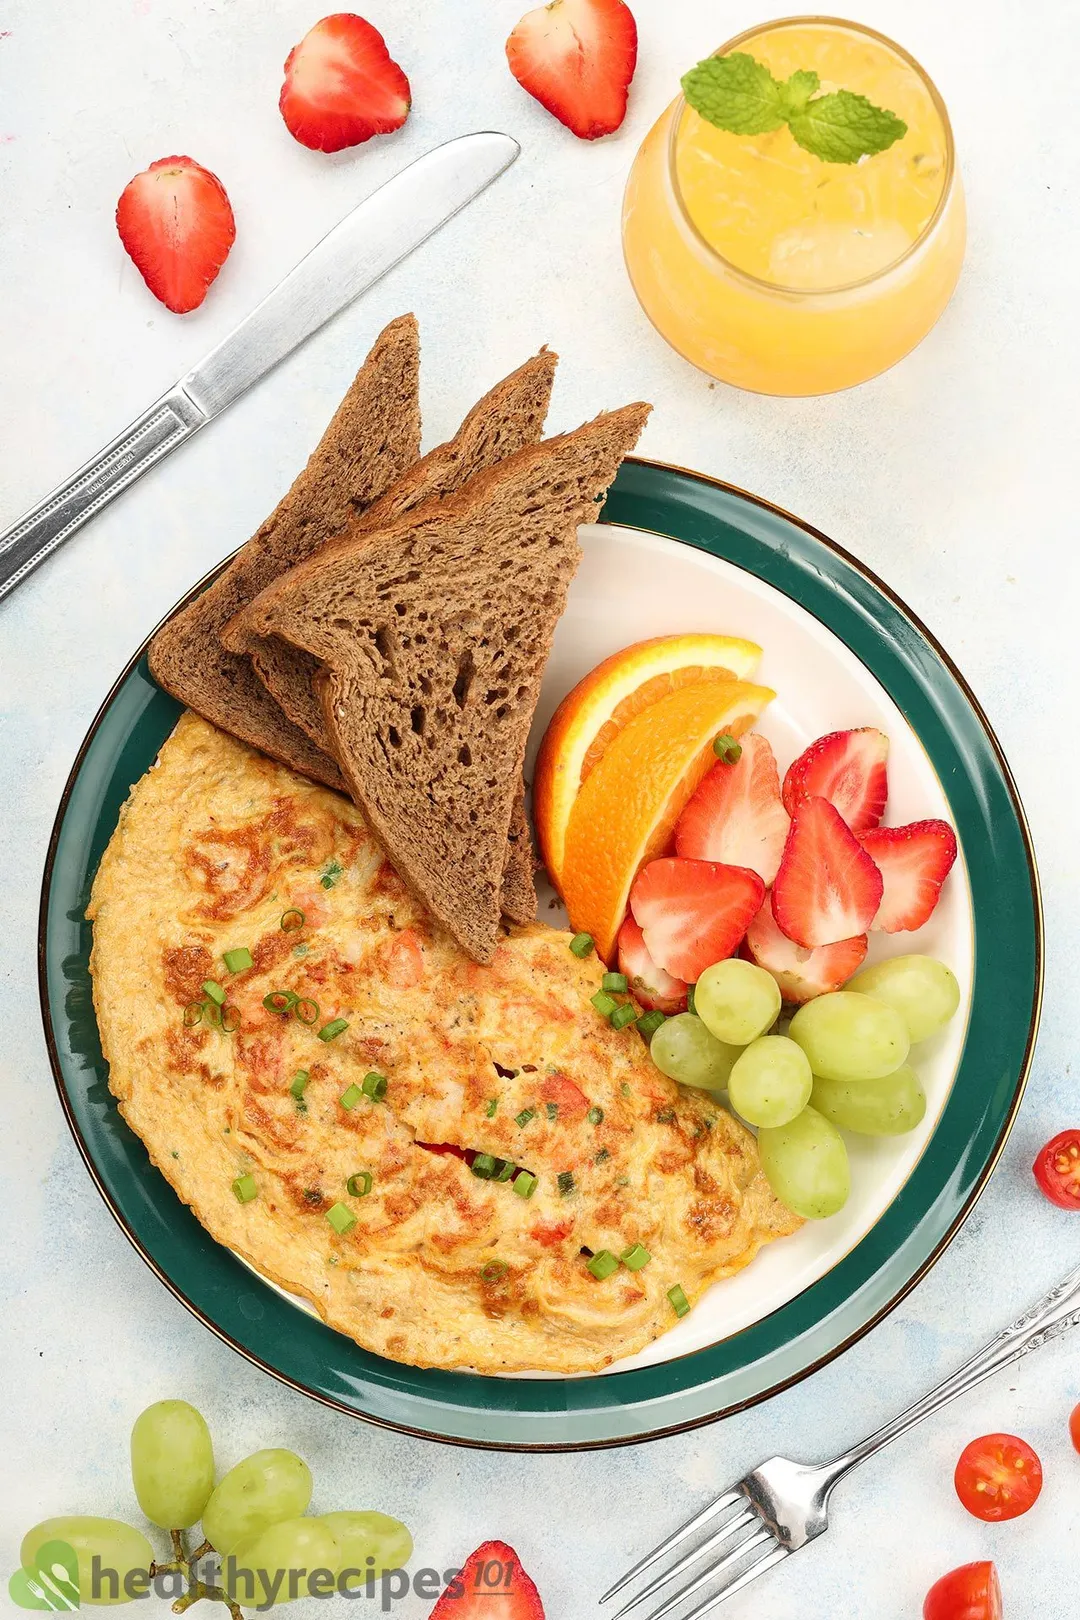 What to Serve with Shrimp Omelet